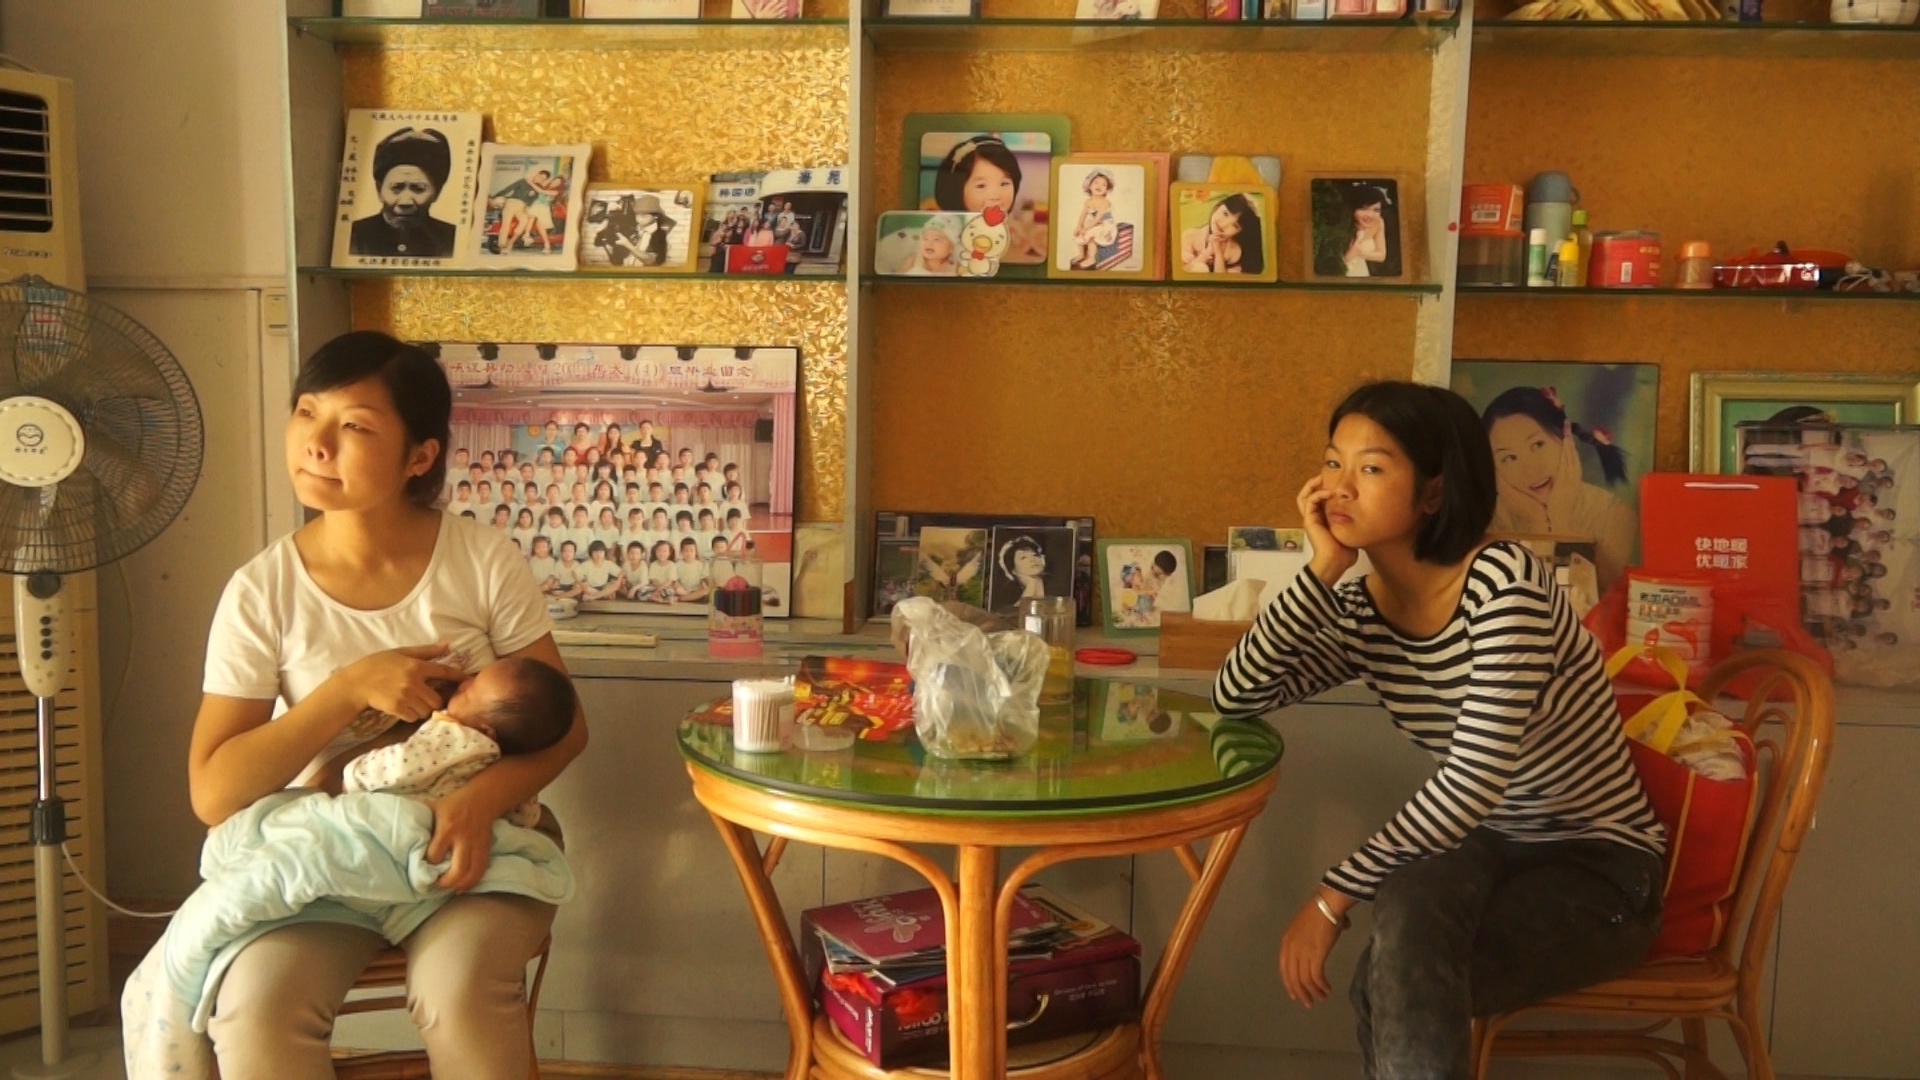 Two adults sit at a cafe. One person at the left is also carrying a baby who they are feeding. The person on the right leans their head on their hand against a table, looking bored.